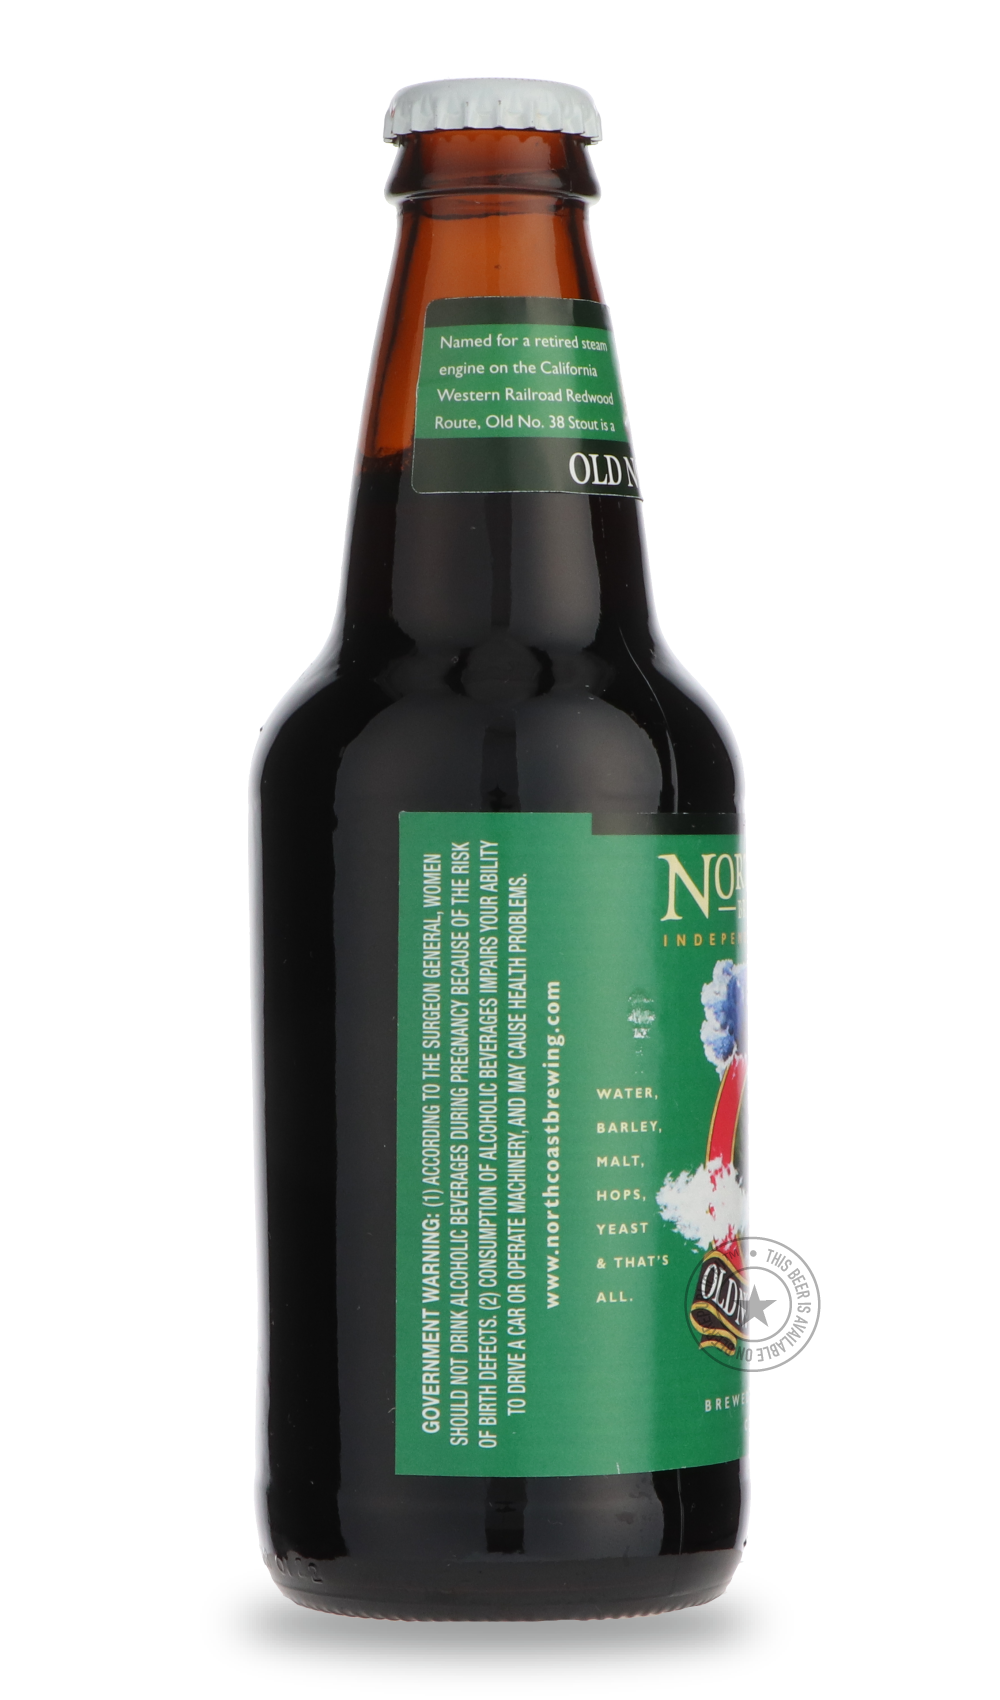 -North Coast- Old No. 38 Stout-Stout & Porter- Only @ Beer Republic - The best online beer store for American & Canadian craft beer - Buy beer online from the USA and Canada - Bier online kopen - Amerikaans bier kopen - Craft beer store - Craft beer kopen - Amerikanisch bier kaufen - Bier online kaufen - Acheter biere online - IPA - Stout - Porter - New England IPA - Hazy IPA - Imperial Stout - Barrel Aged - Barrel Aged Imperial Stout - Brown - Dark beer - Blond - Blonde - Pilsner - Lager - Wheat - Weizen -